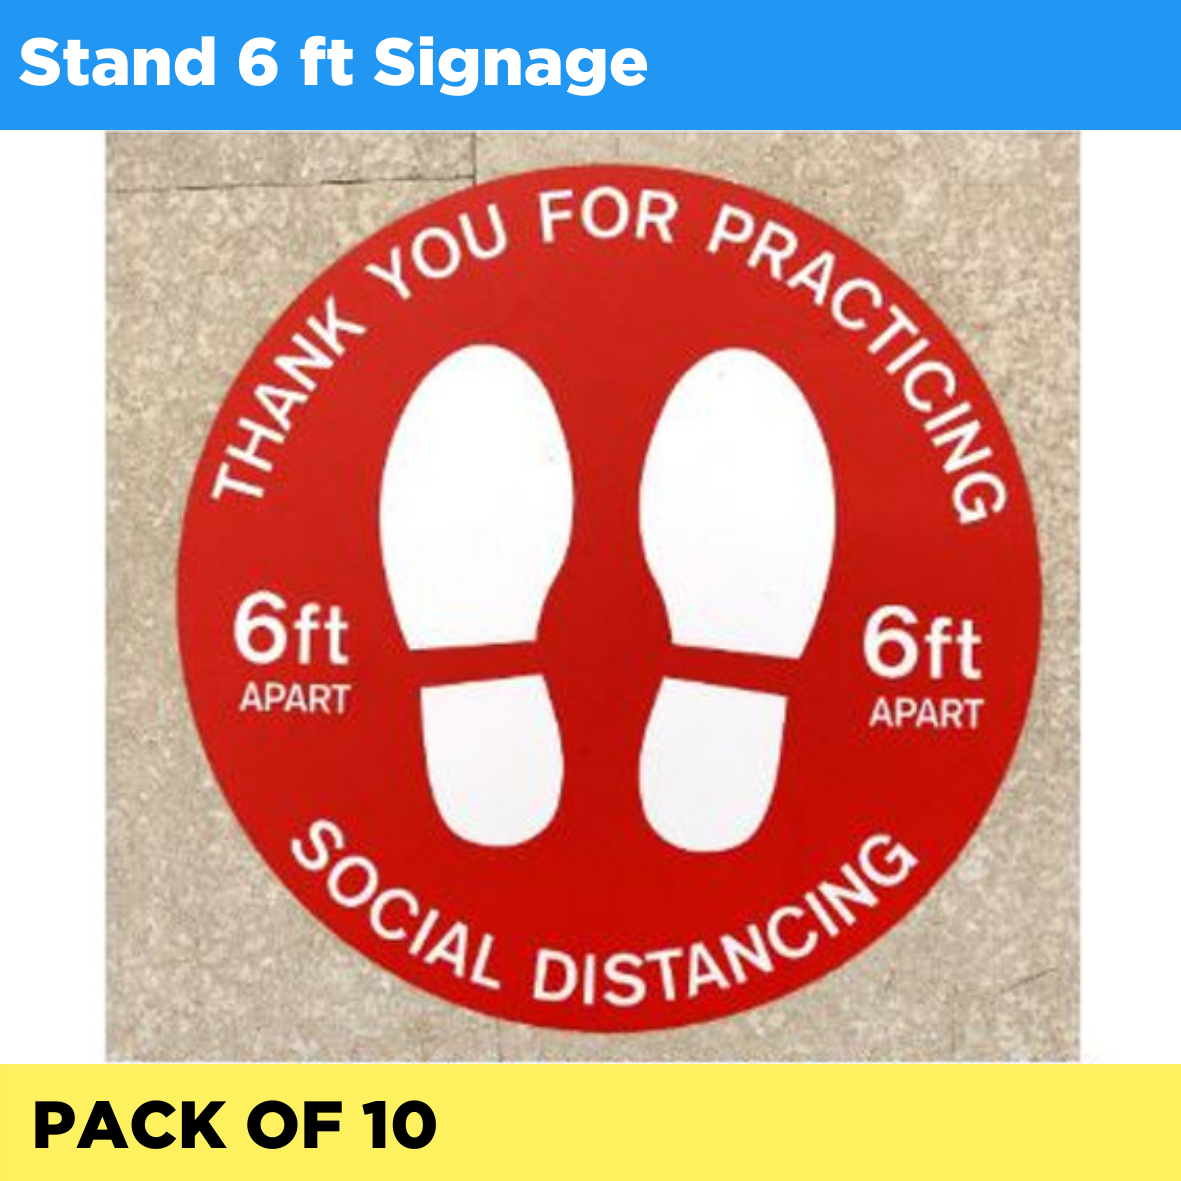 Stand 6 feet Signage - Pack of 10 (Listing ID: 6617452707909)